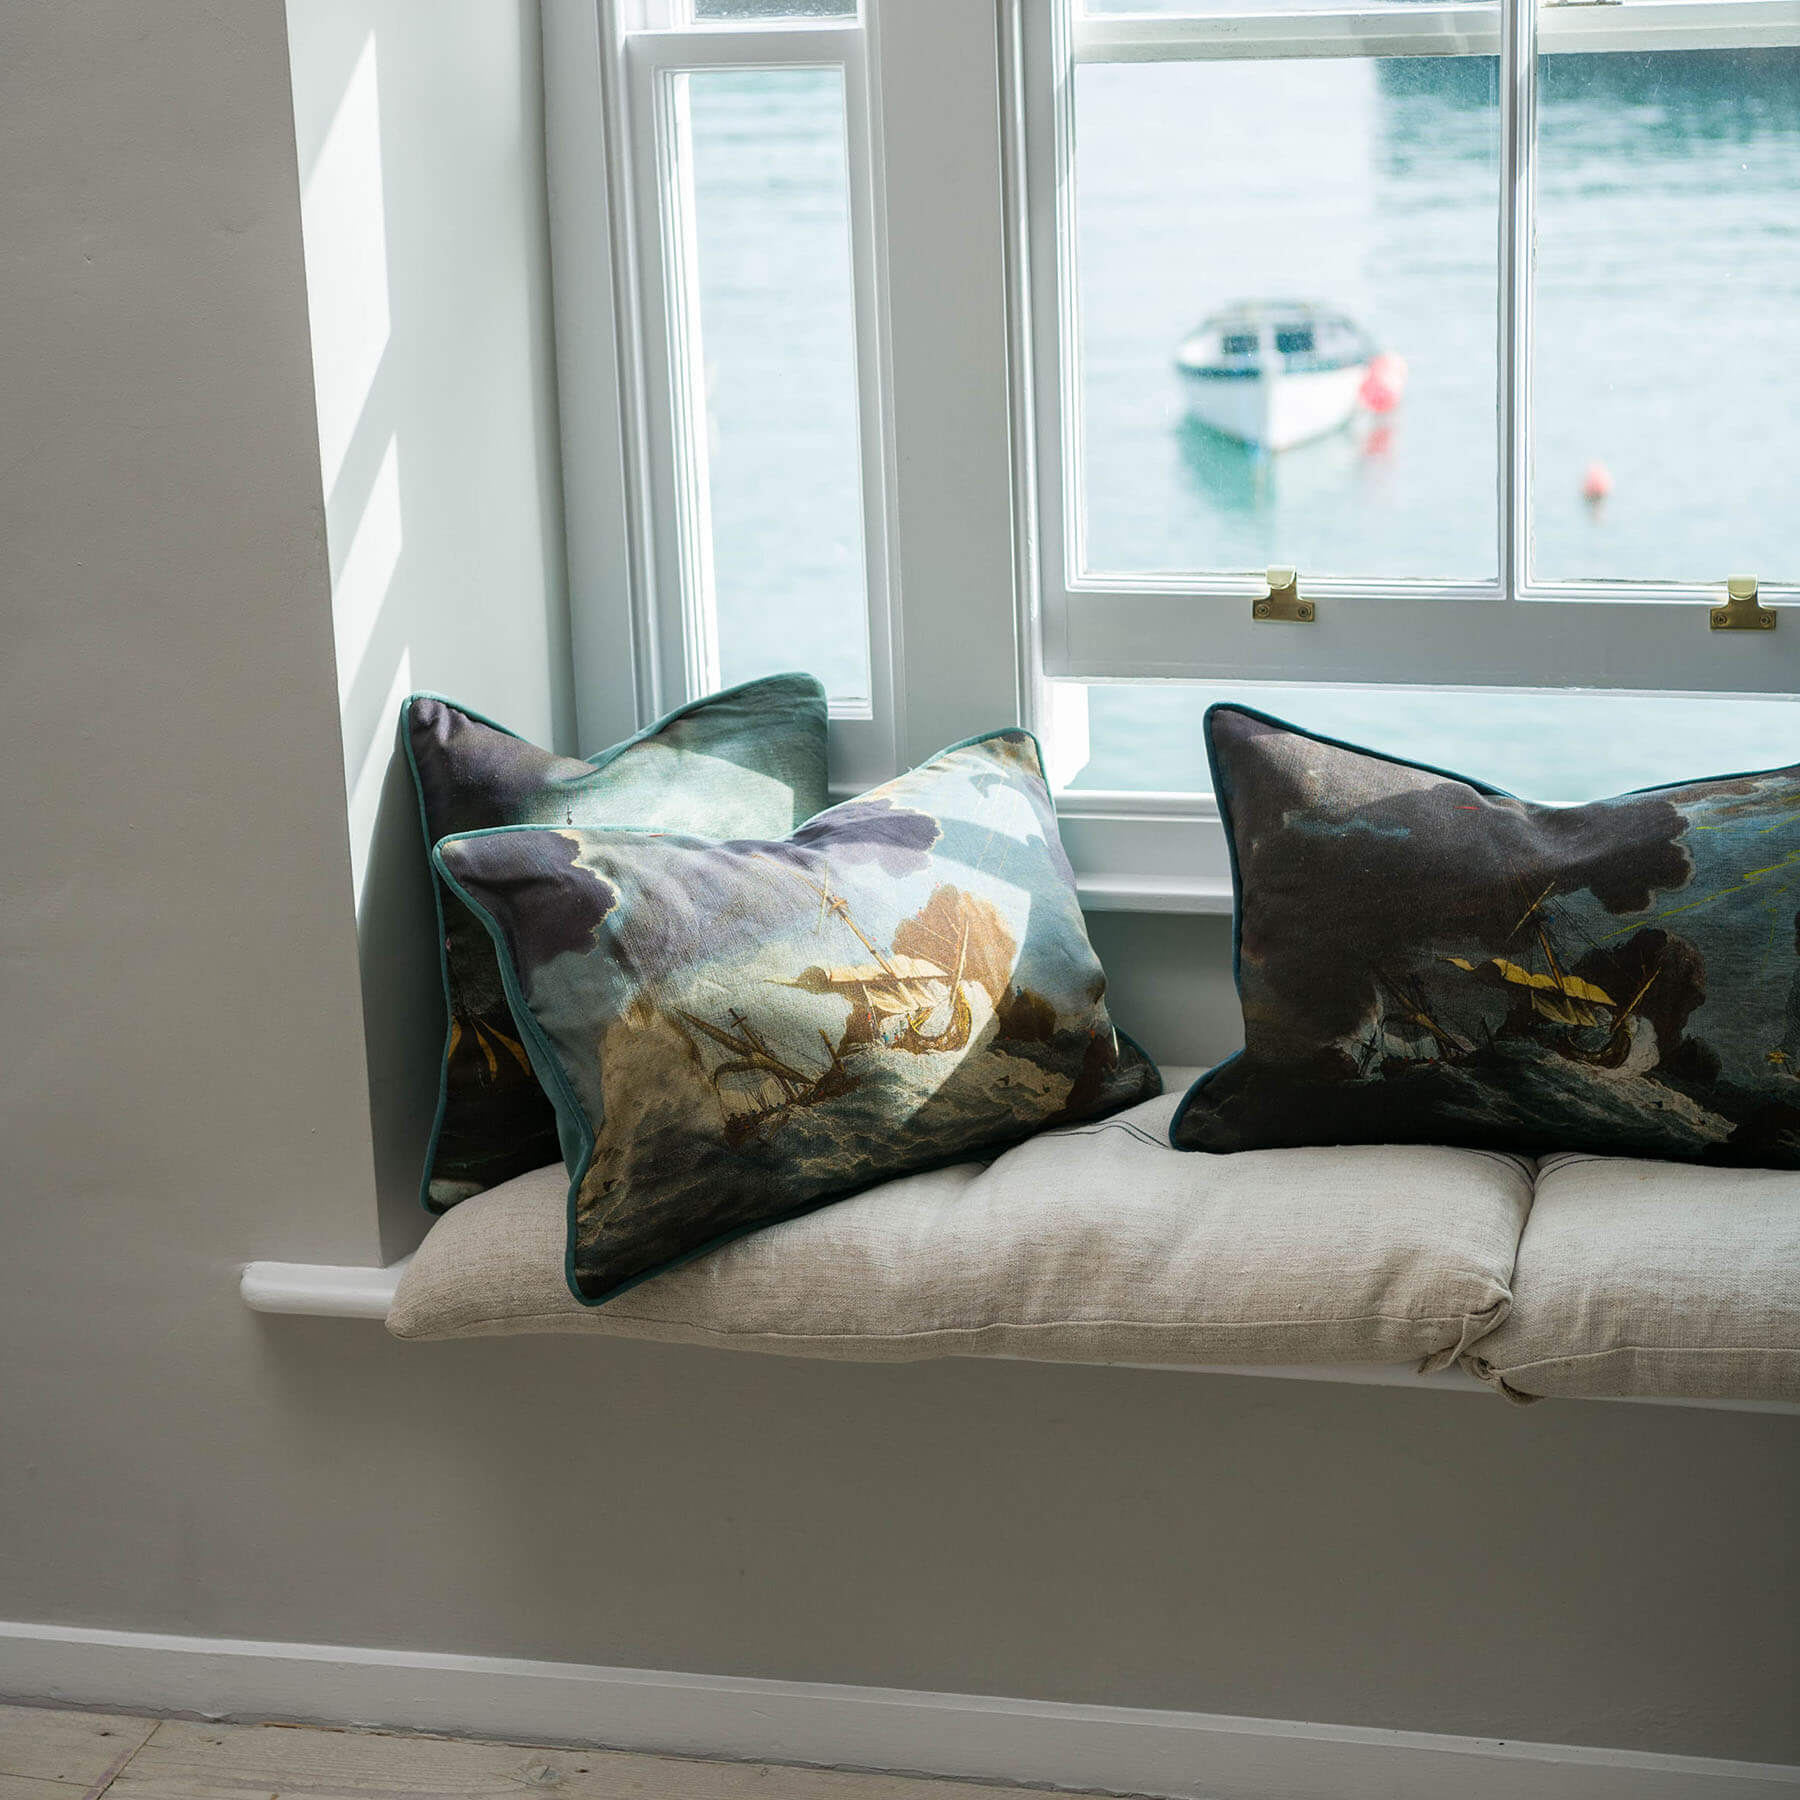 Shipwreck day cushion placed on a windowsill with other shipwreck cushions.You can see the sea outside and a small boat.